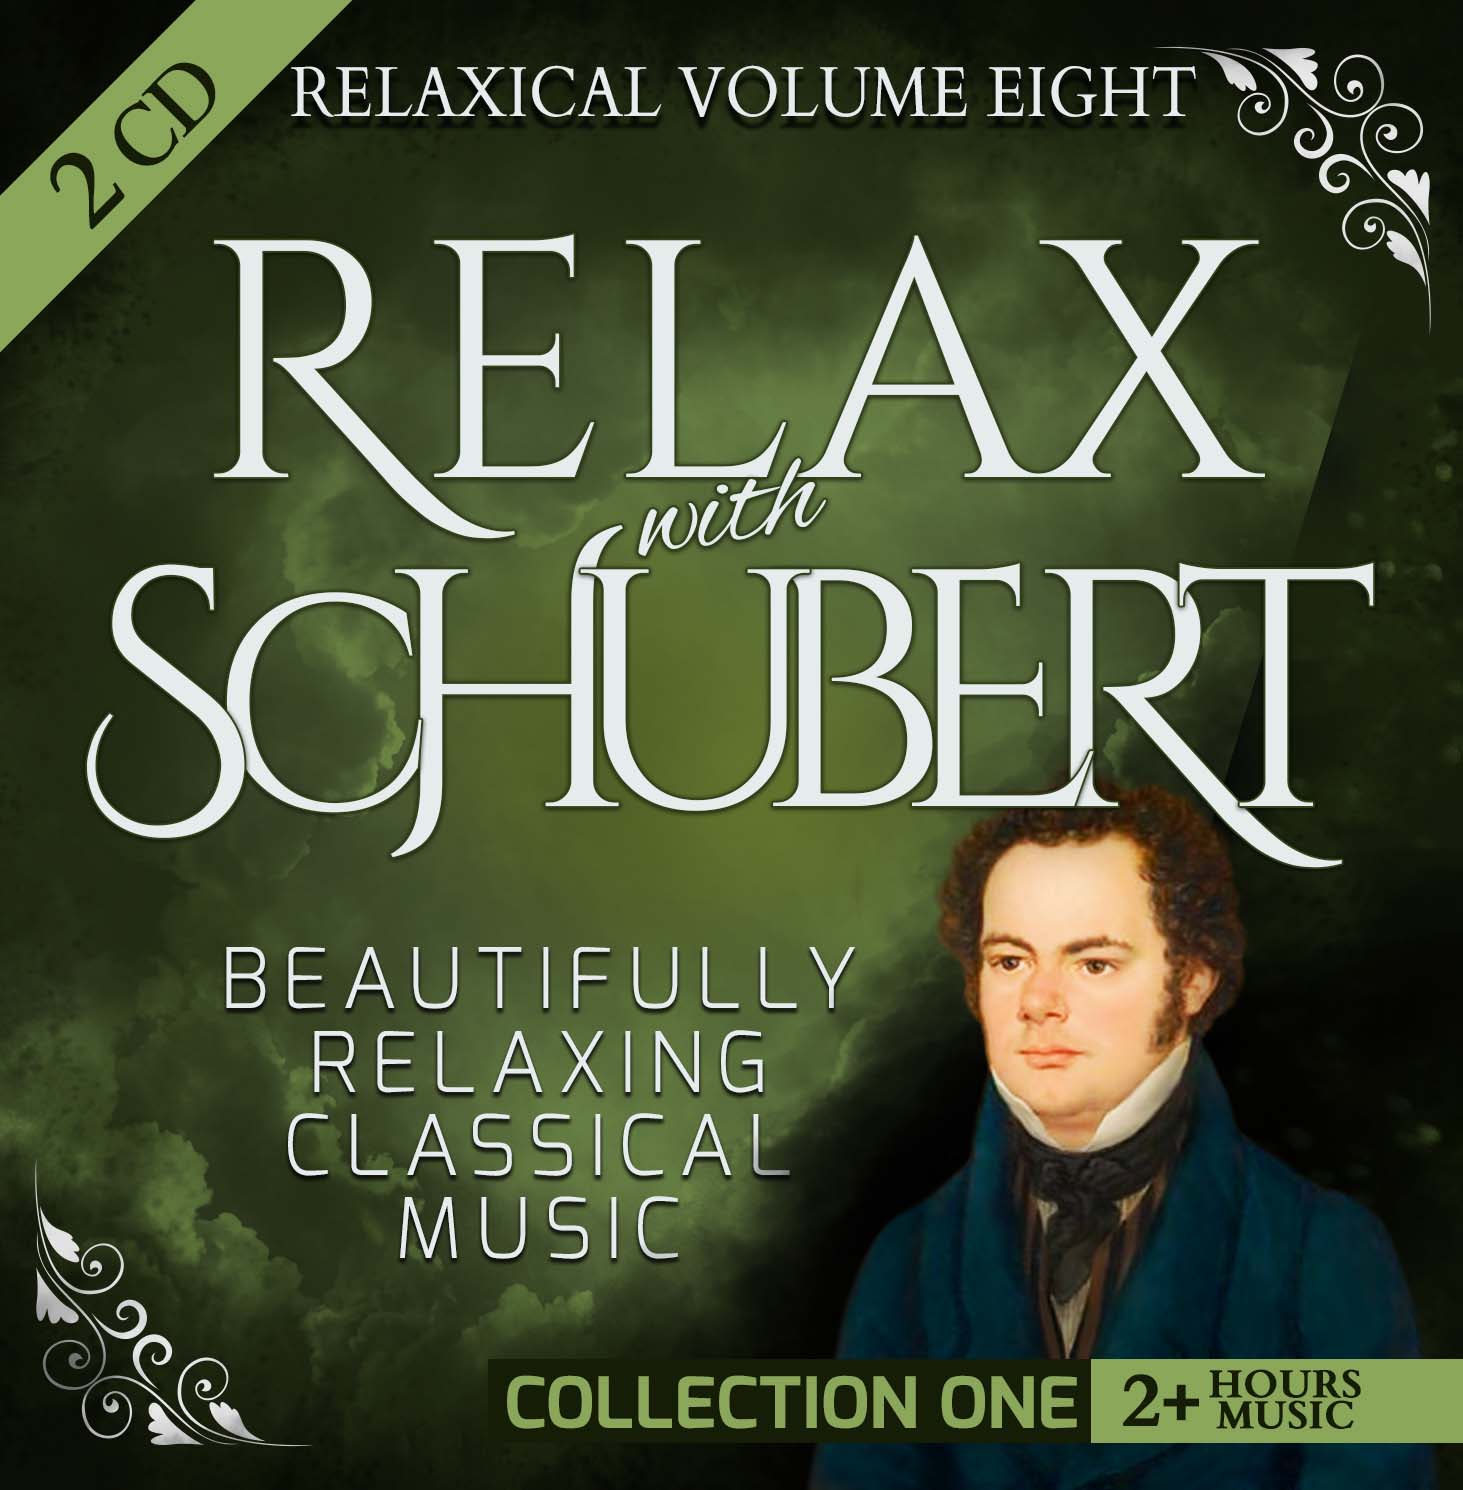 Volume 8 - Relax with Schubert (Collection One): Beautifully Relaxing Classical Music